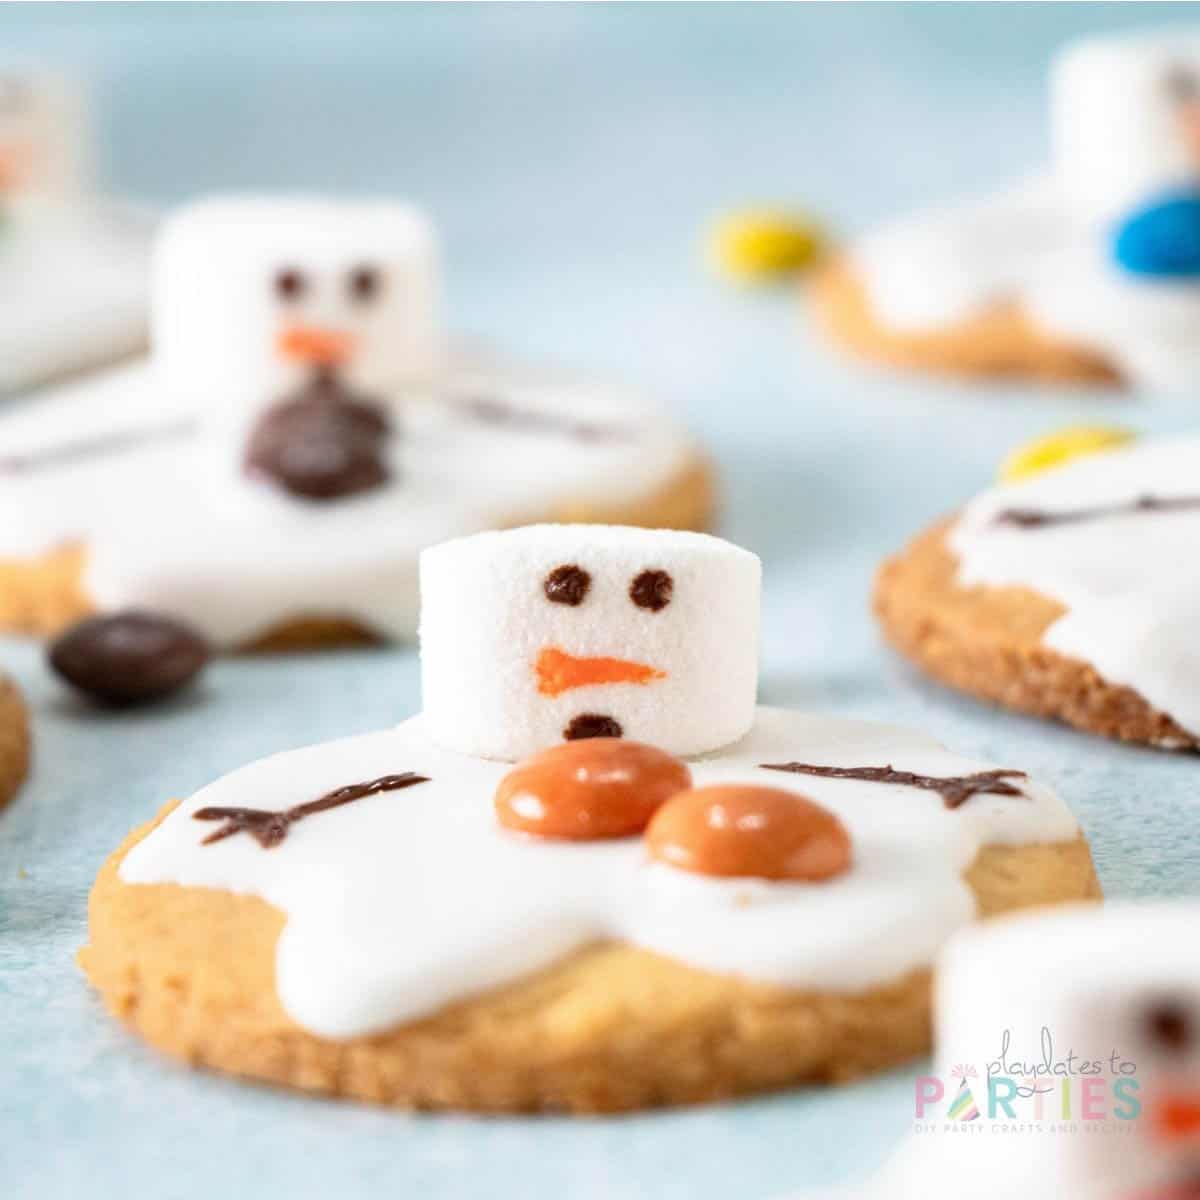 Front view of a Christmas cookie that looks like a melting snowman.